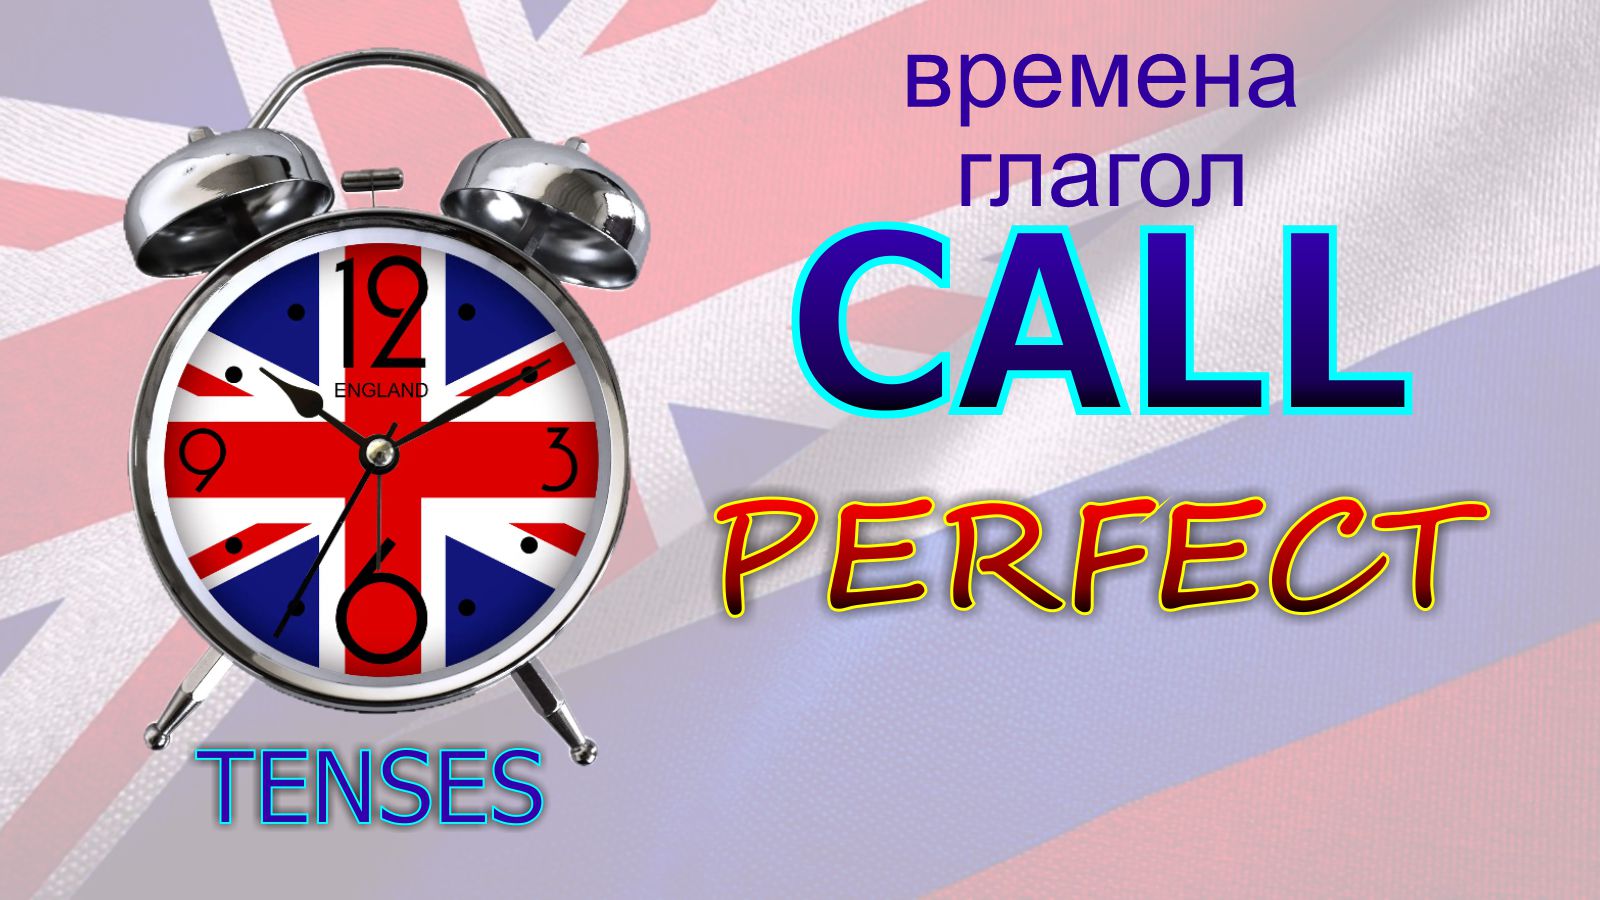 Времена. Глагол to CALL. PERFECT